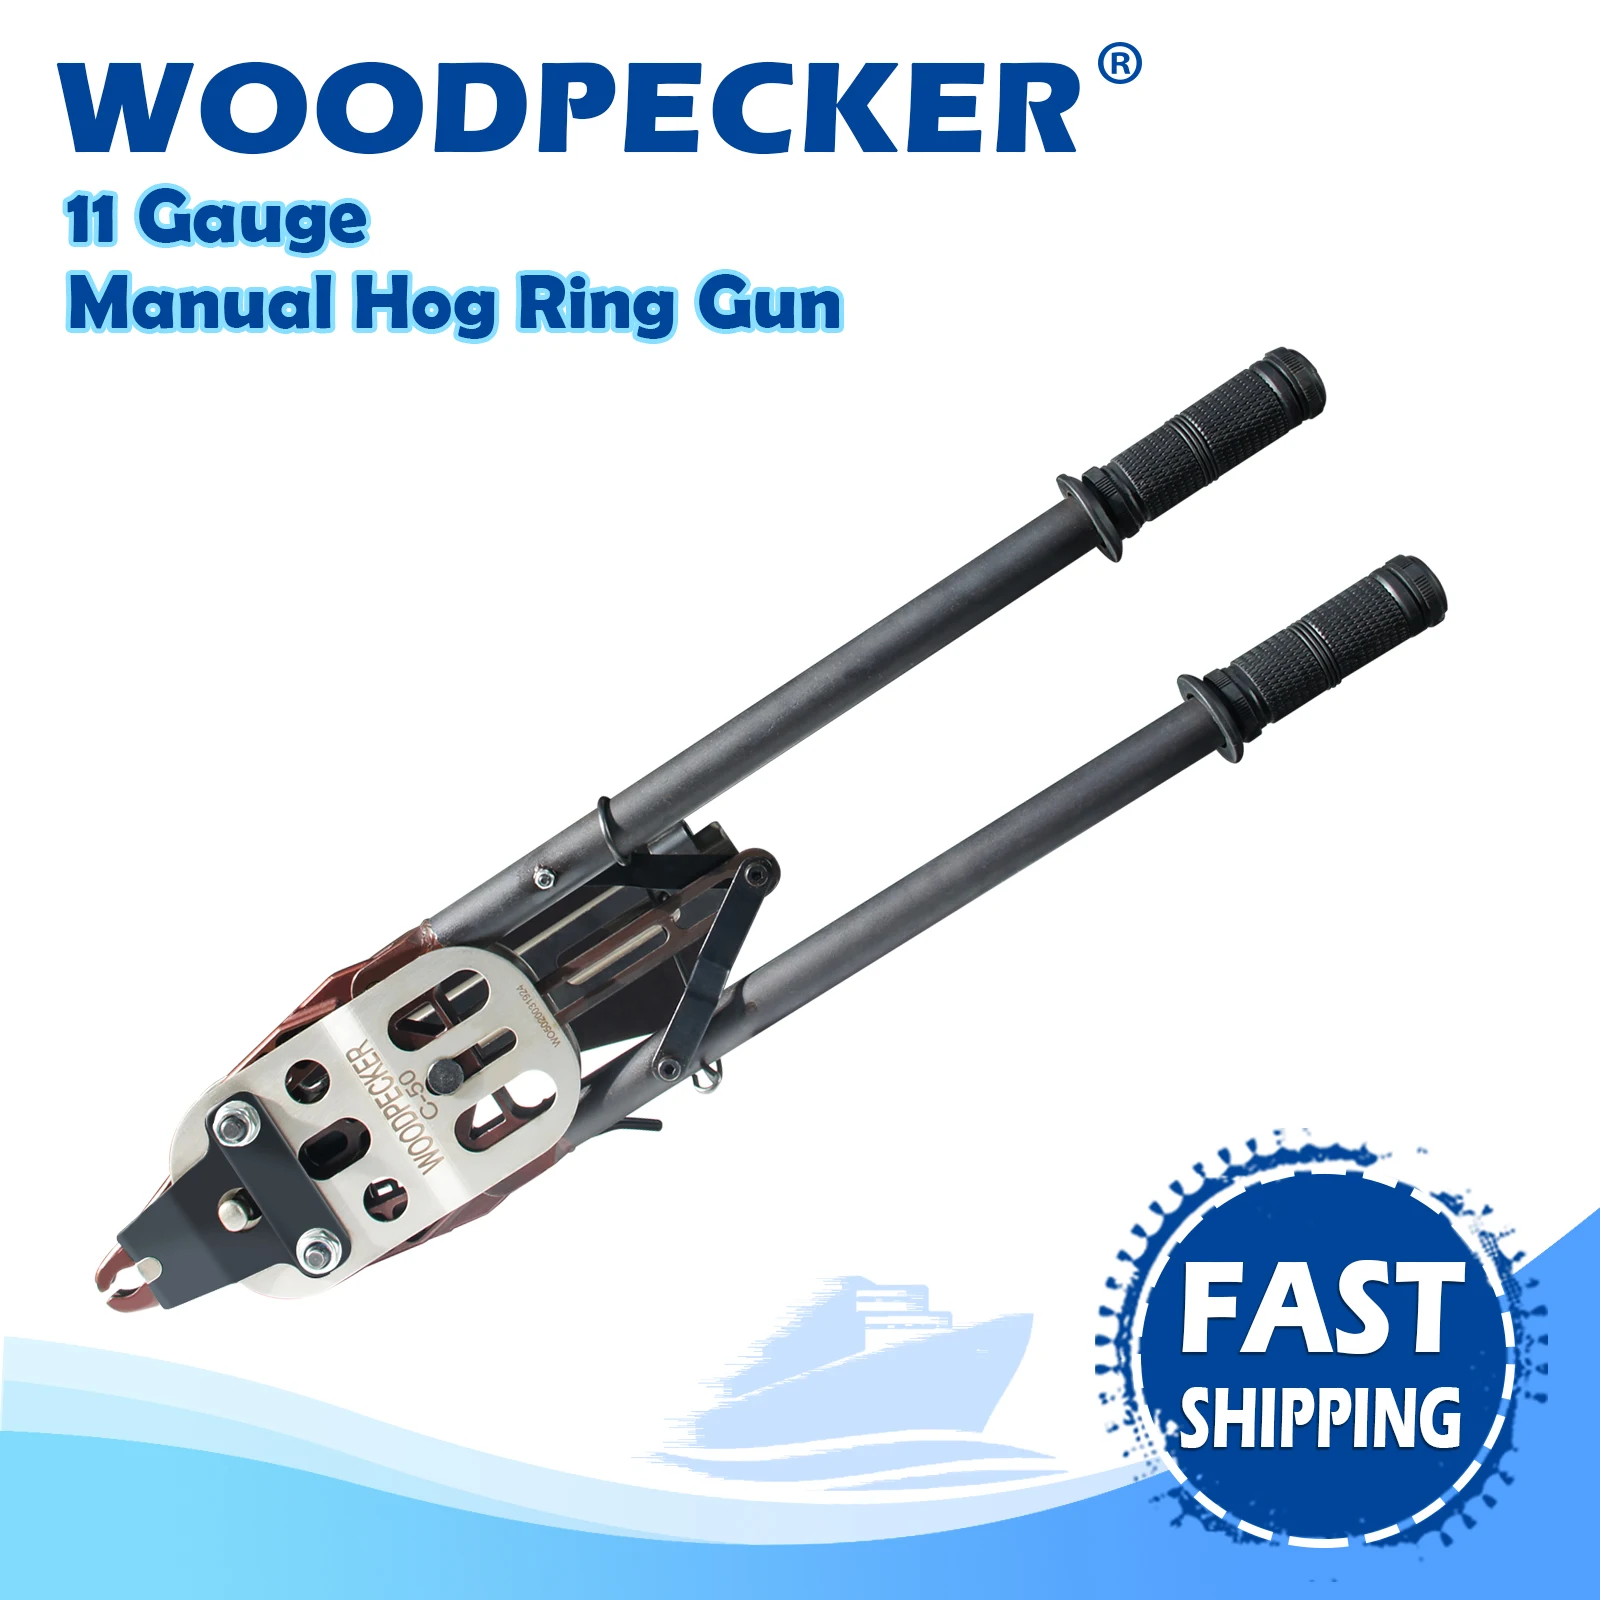 WOODPECKER C50 11 Gauge Heavy-Duty Manual Hog Ring Gun, Snap-Ring Plier with Auto-feed System, 45mm Crown for Wire Cages,Fencing 1 8 bspt oil pressure sensor tee to npt adapter turbo supply feed line gauge 303 stainless steel handy fitting